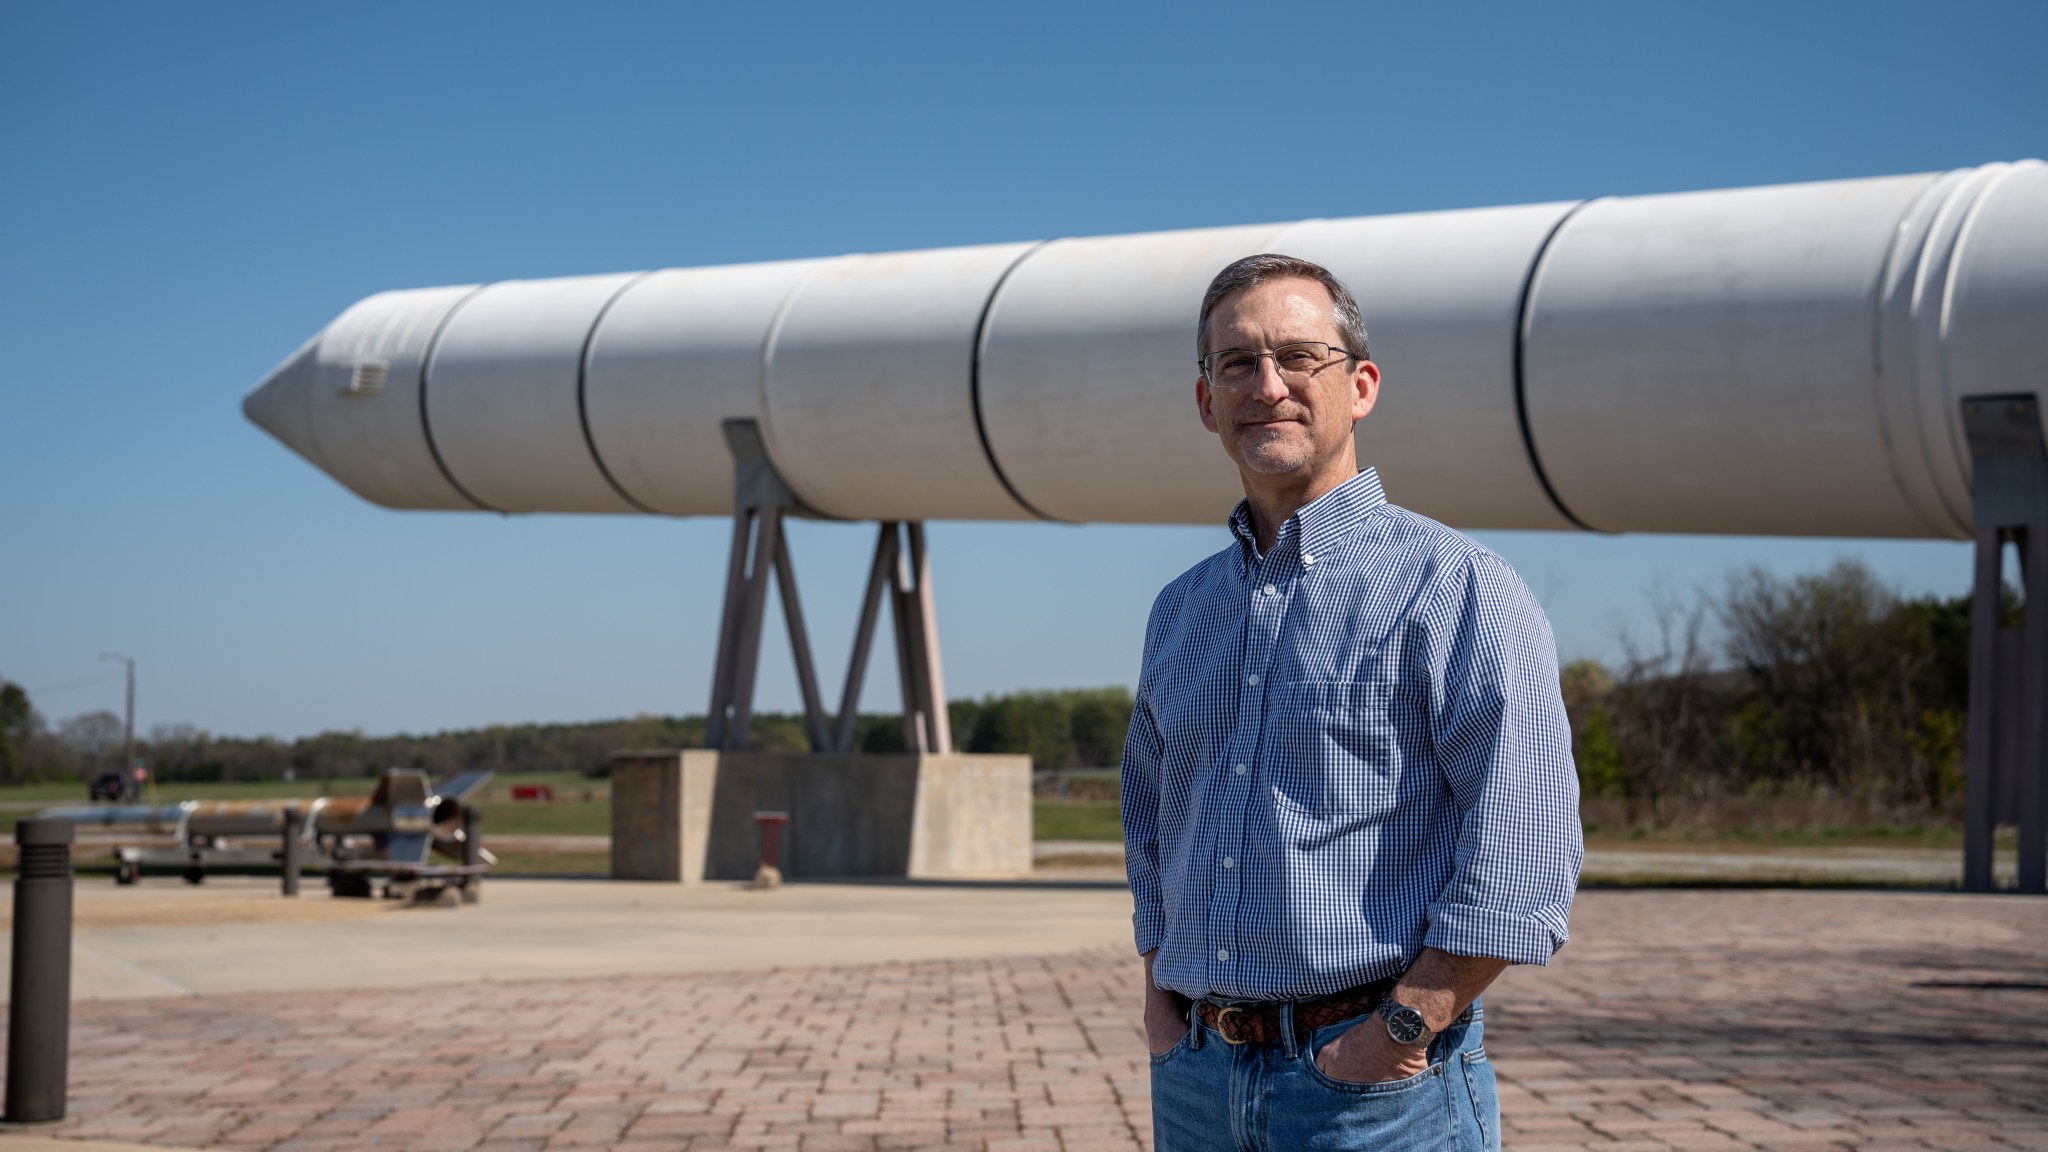 Mat Bevill, the associate chief engineer for NASA’s SLS (Space Launch System) Program, plays a crucial role in the development and flight of the SLS mega rocket. His NASA journey started as an intern, led him to have hands-on experience with solid rocket boosters, and landed him in the position of supporting the SLS Chief Engineer’s Office.